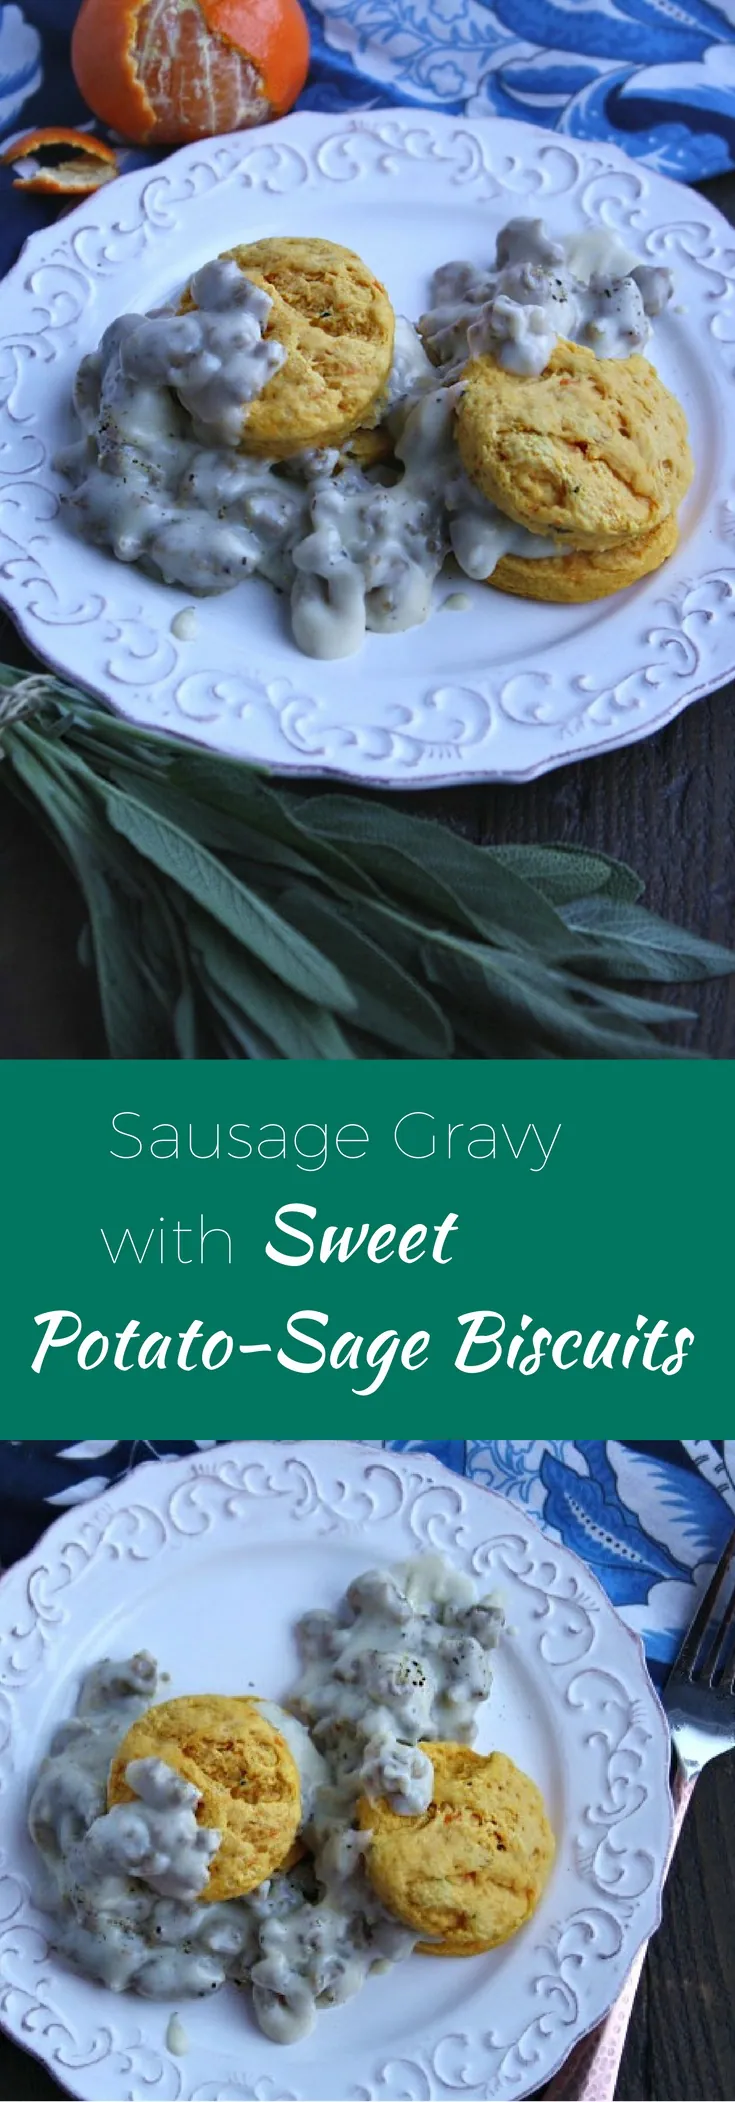 Make a fabulous (and easy) fall breakfast: Sausage Gravy and Sweet Potato-Sage Biscuits!